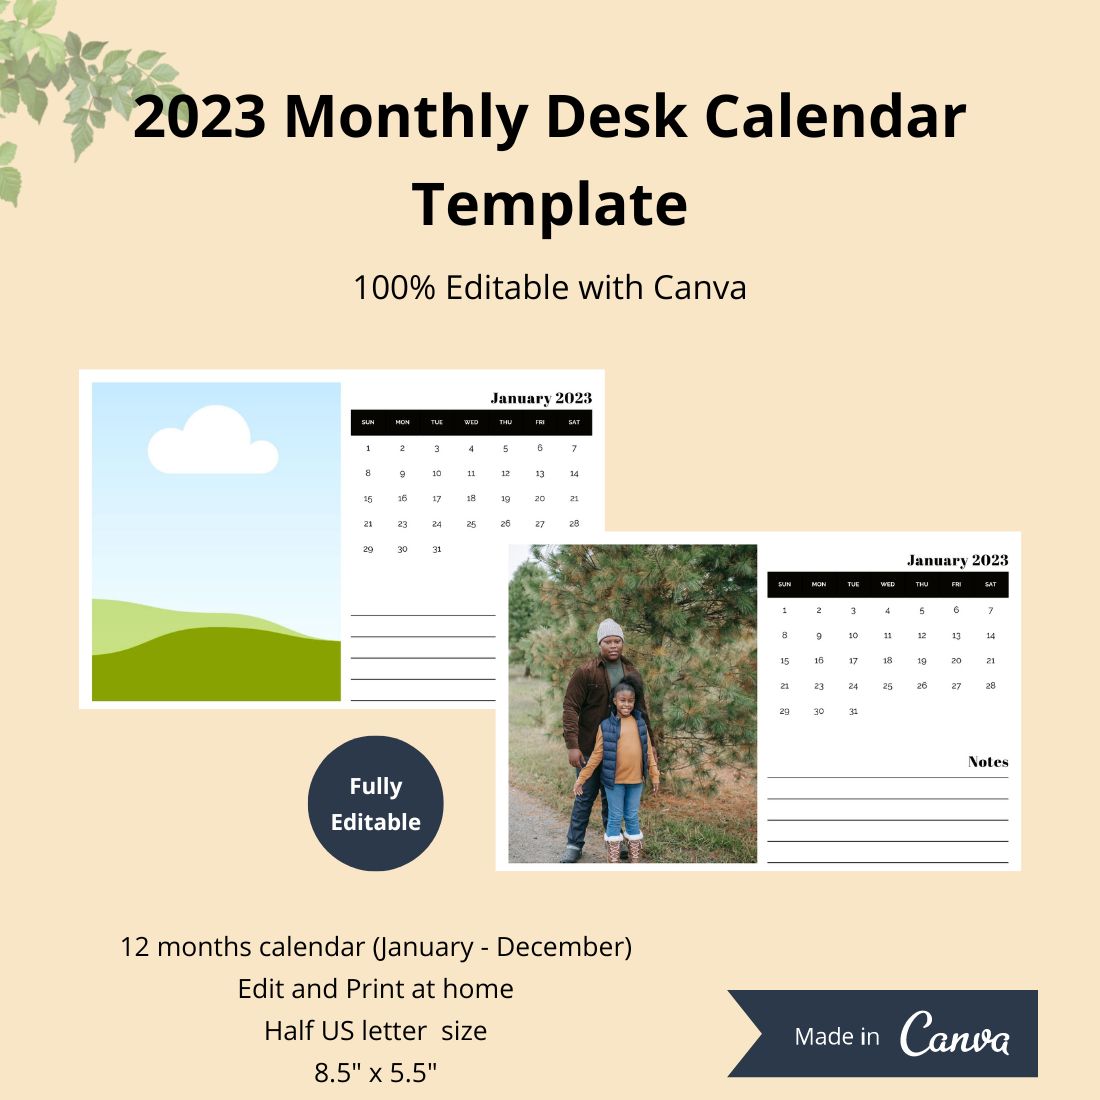 Monthly Desk Calendar Template Fully Editable cover image.